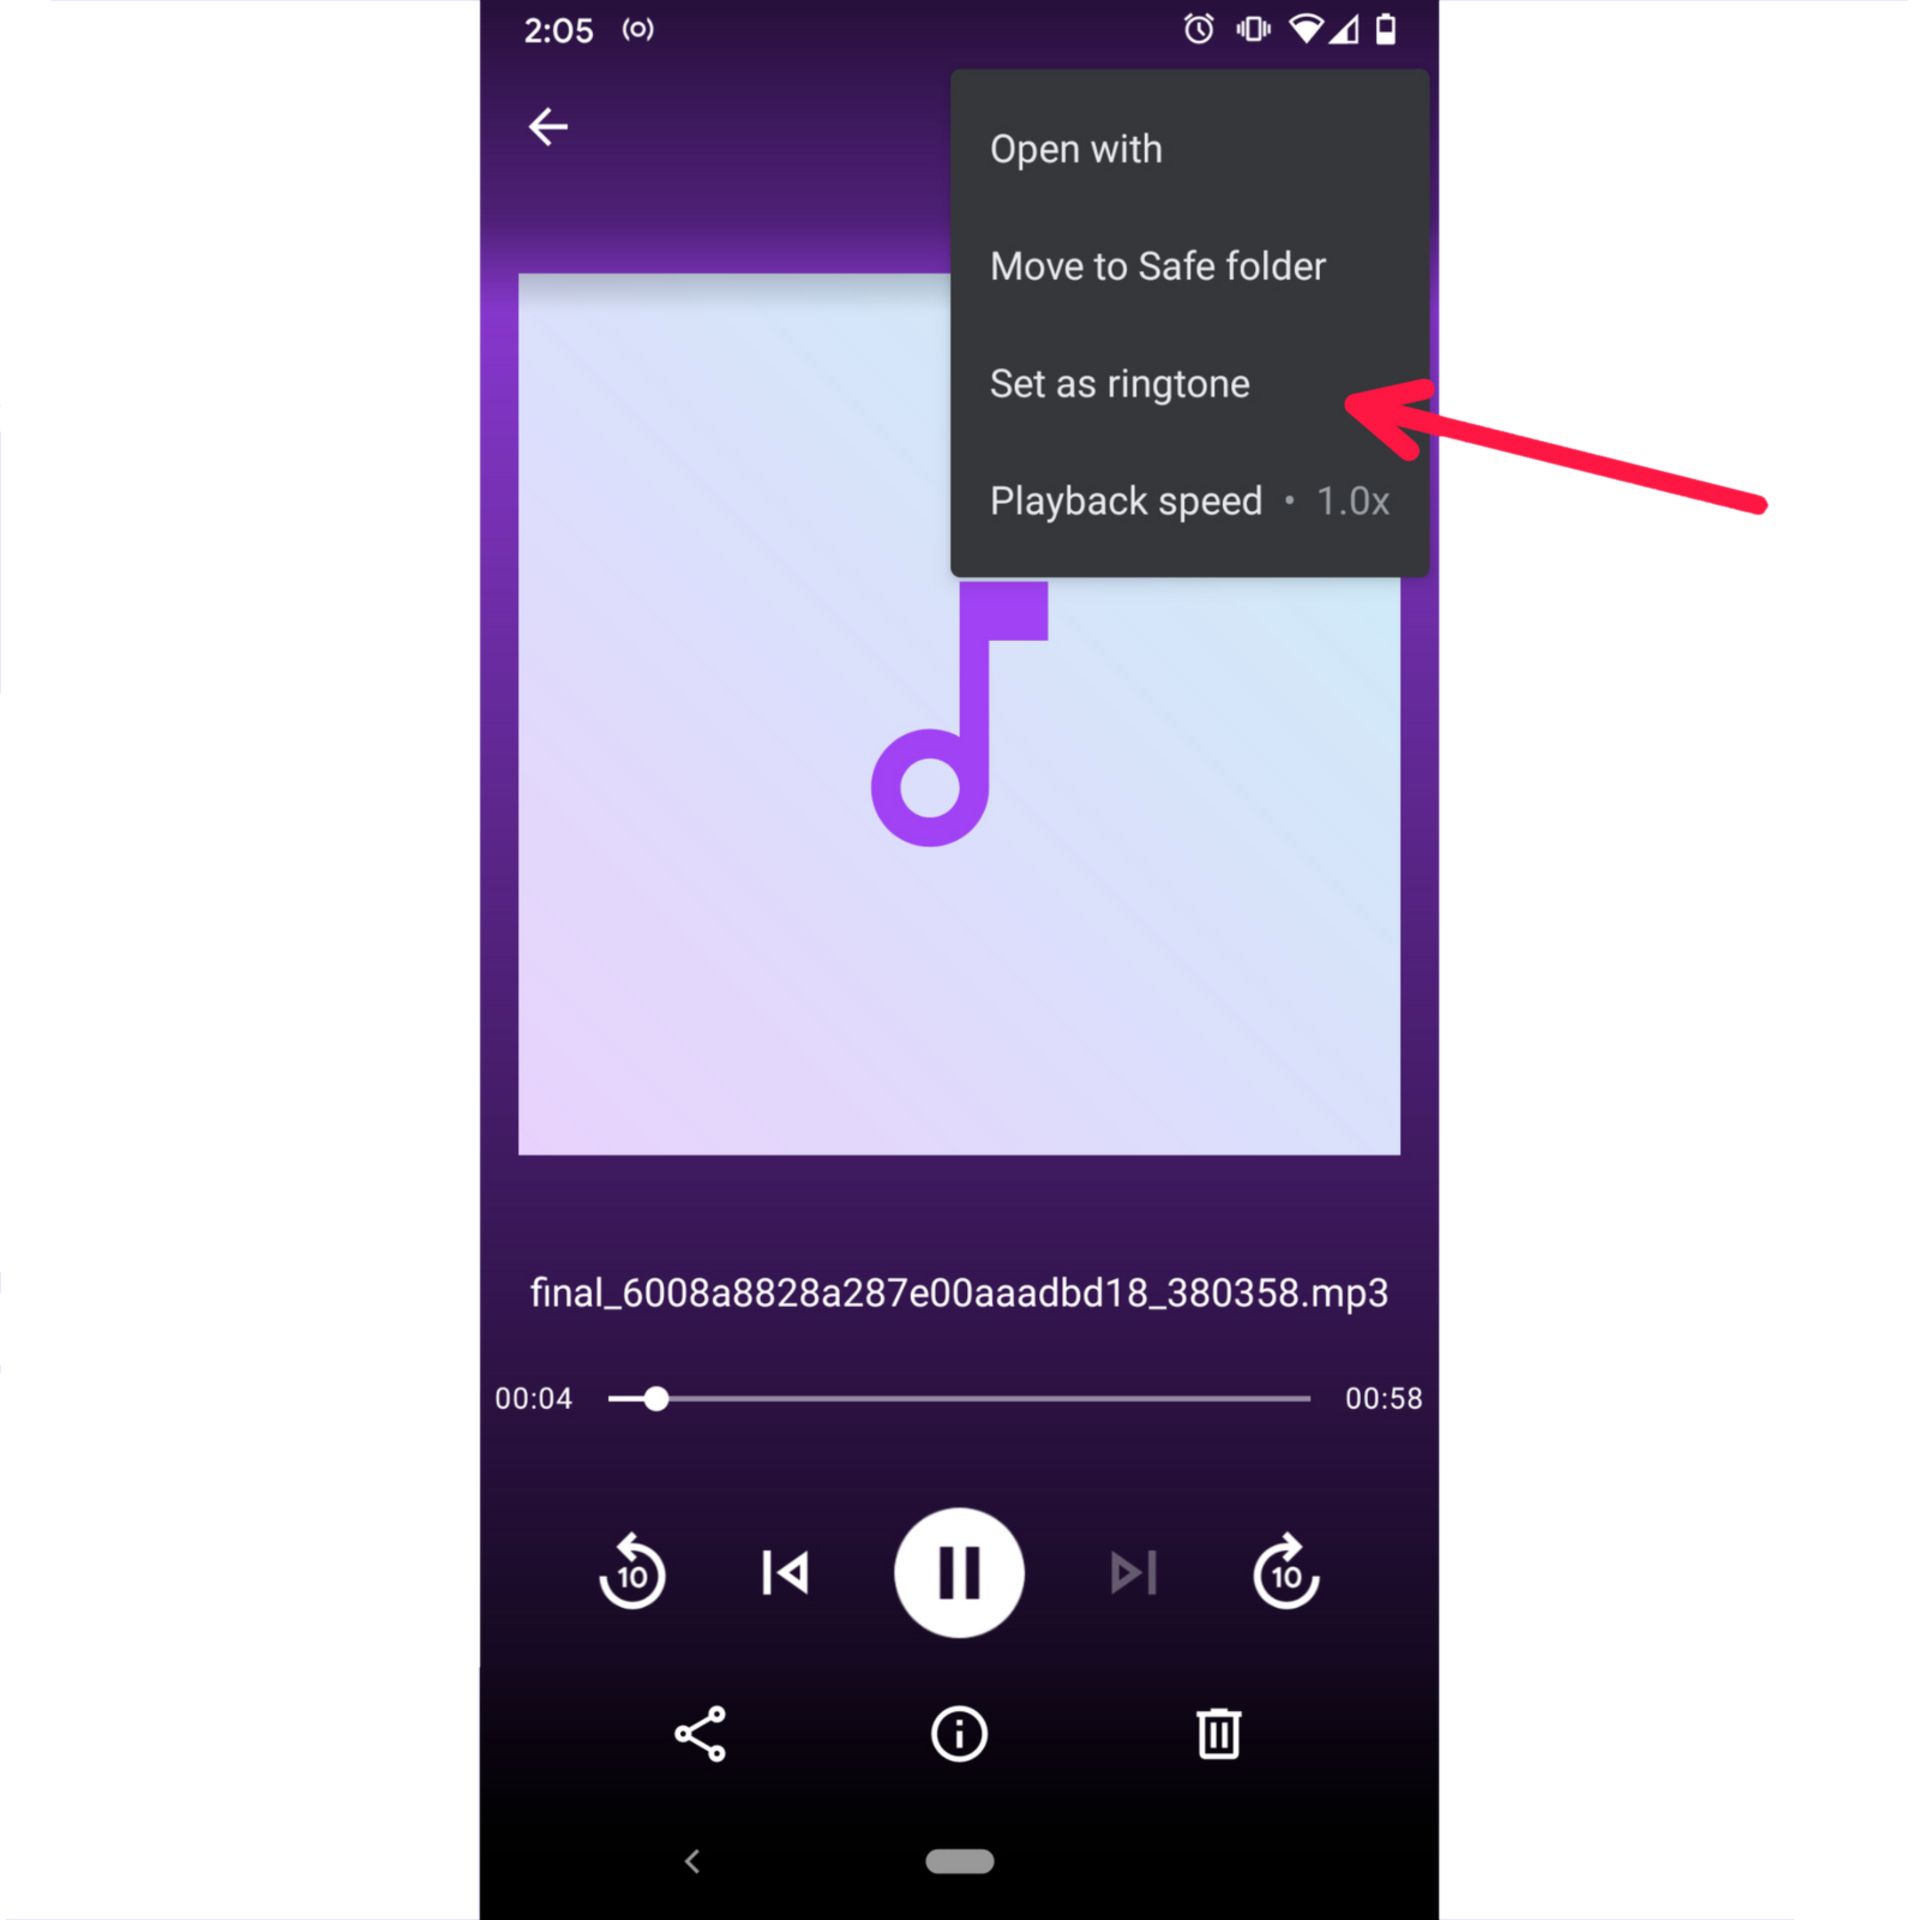 Android user interface with a menu to save audio as a ringtone